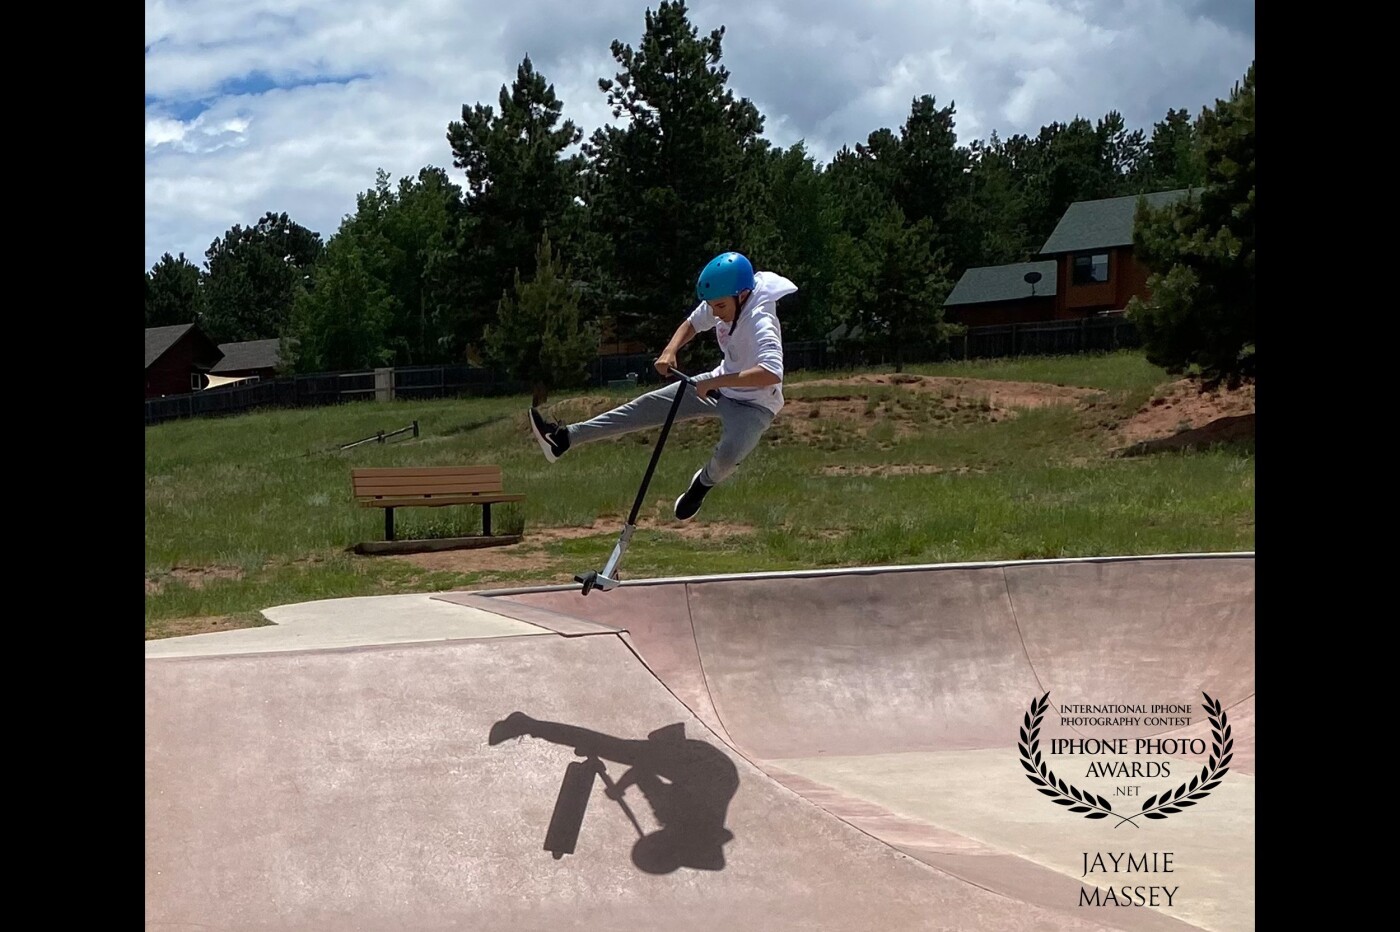 Catching air. Aspiring to be a pro scooter champion means exploring every skatepark in every town to try new tricks. This little skatepark was a favorite stop in Woodland Park, Co.